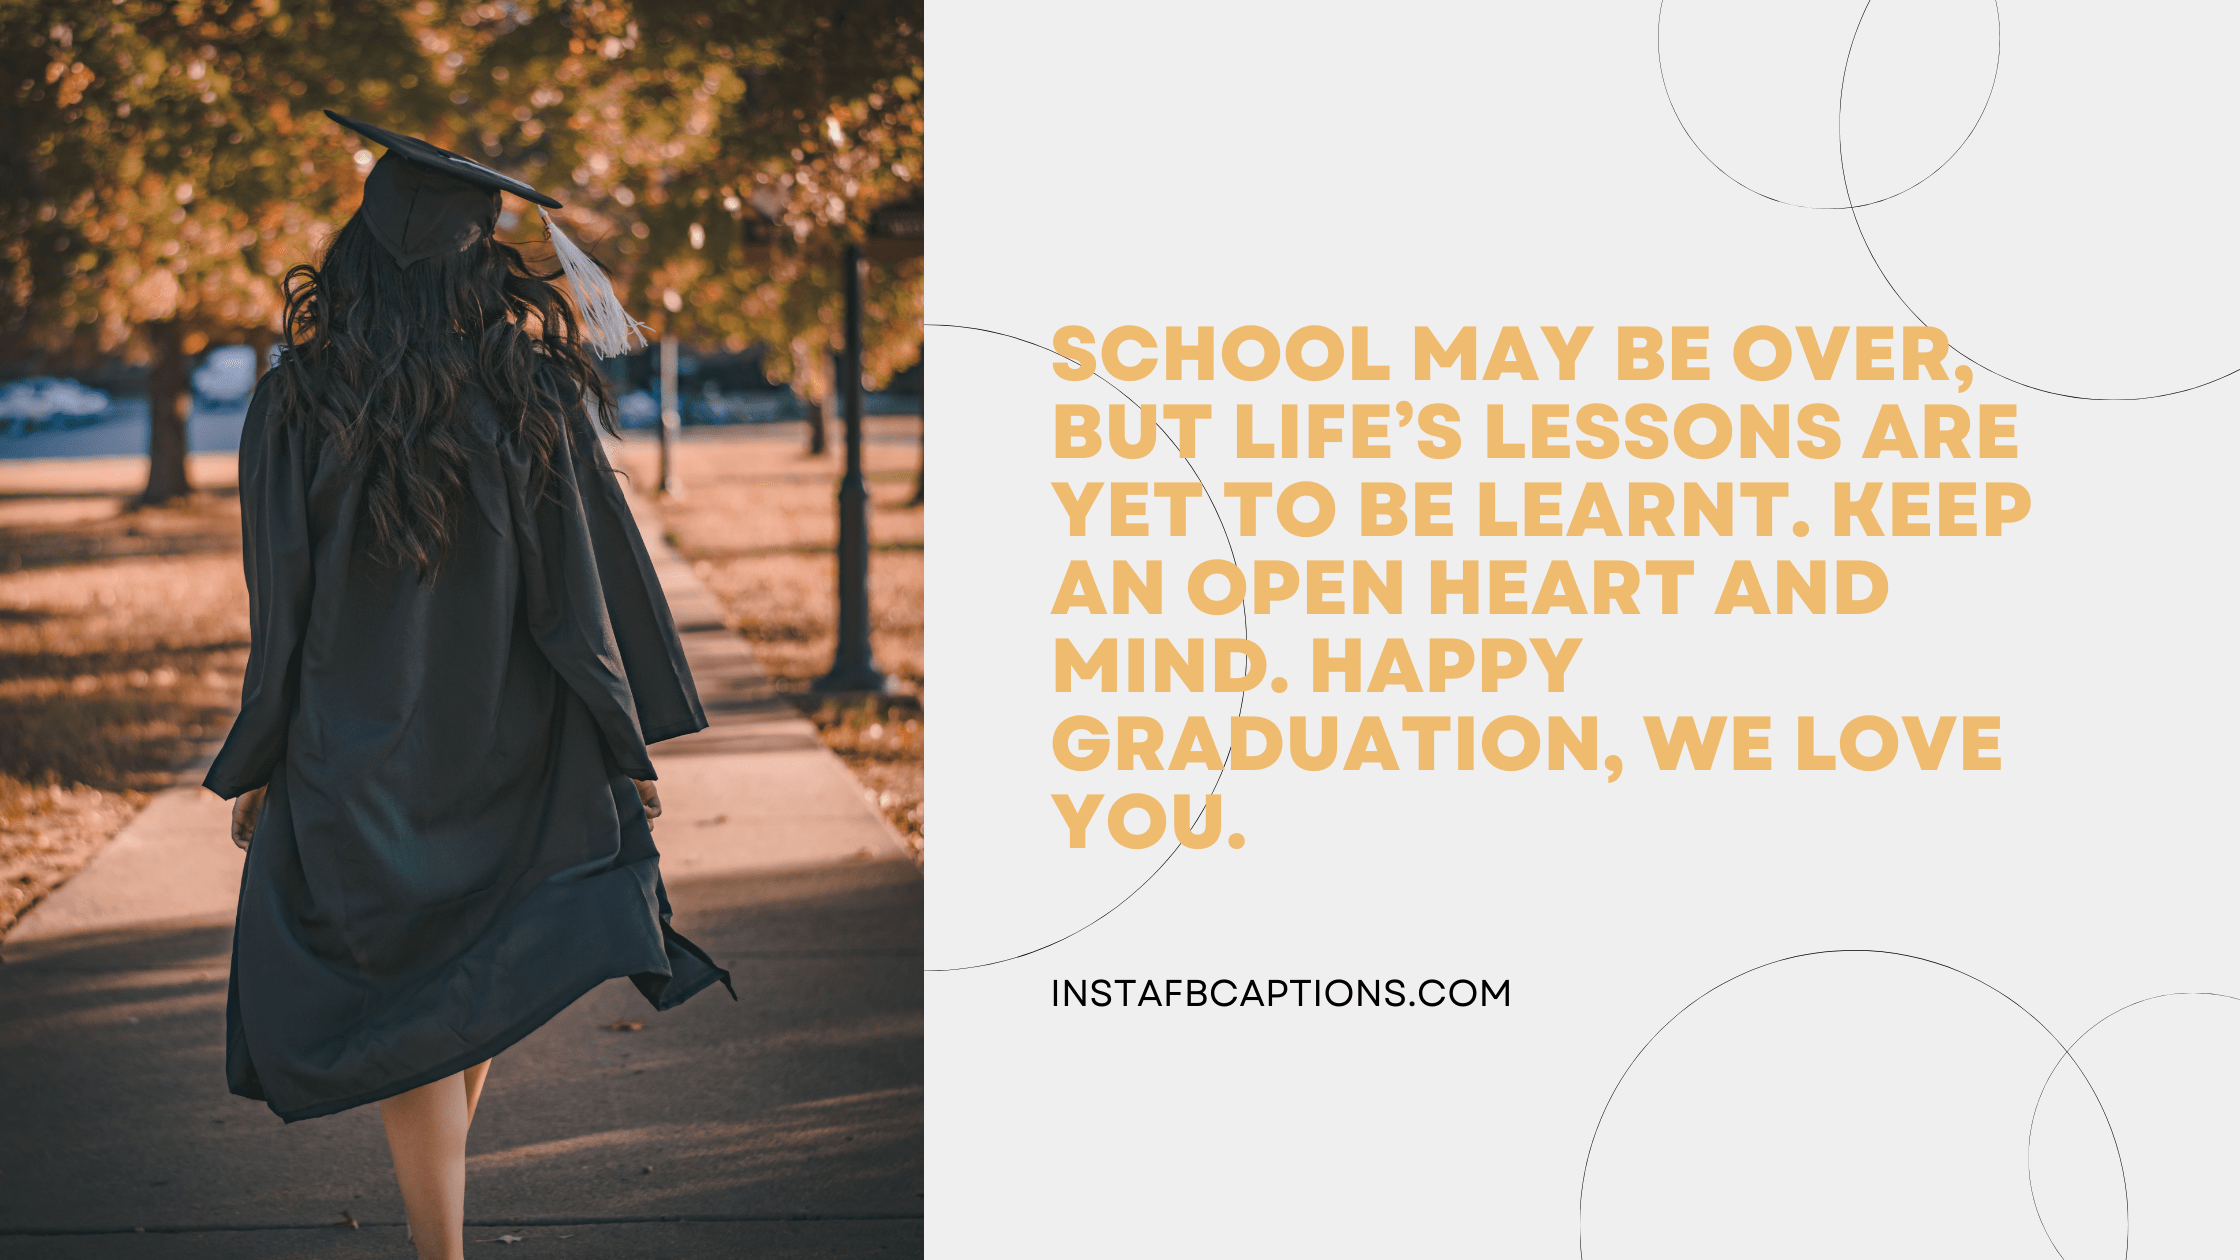 School may be over, but life’s lessons are yet to be learned. Keep an open heart and mind. Happy graduation, we love you.  - Graduation Wishes from Parents - [New Captions] Graduation Captions Quotes for Instagram 2023